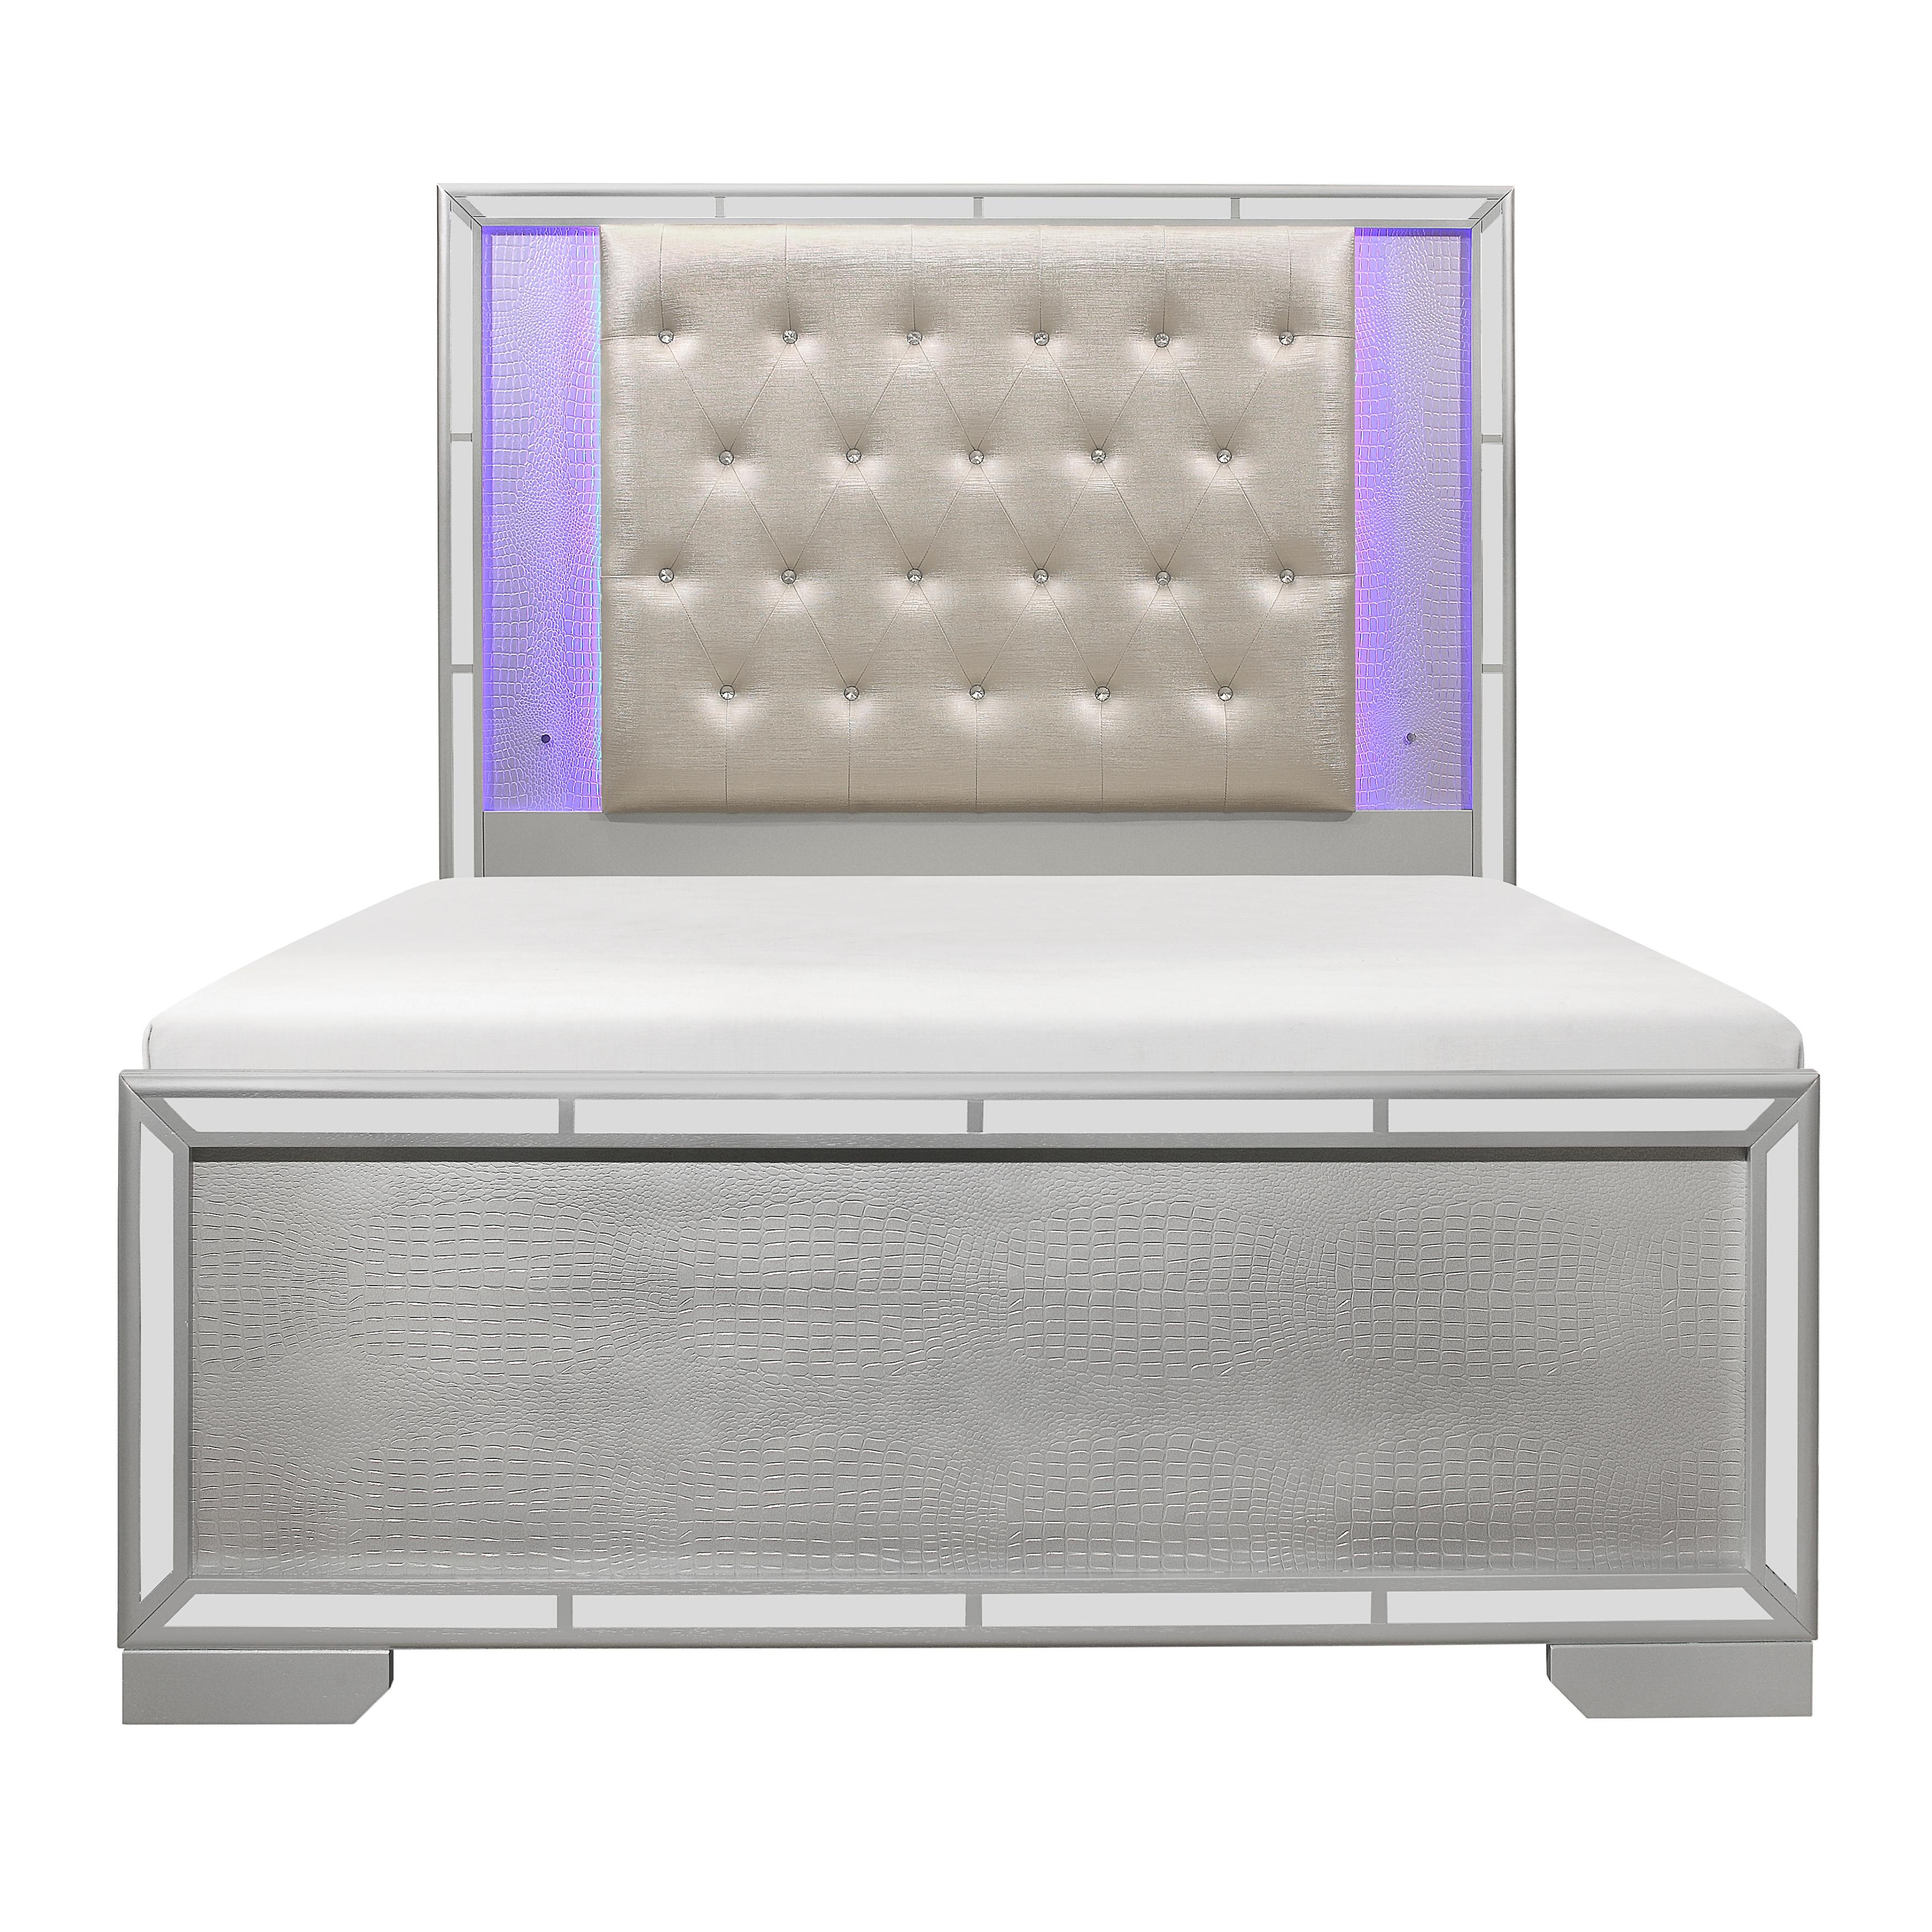 Modern Bed 1428SV-1* Aveline 1428SV-1* in Silver Faux Leather